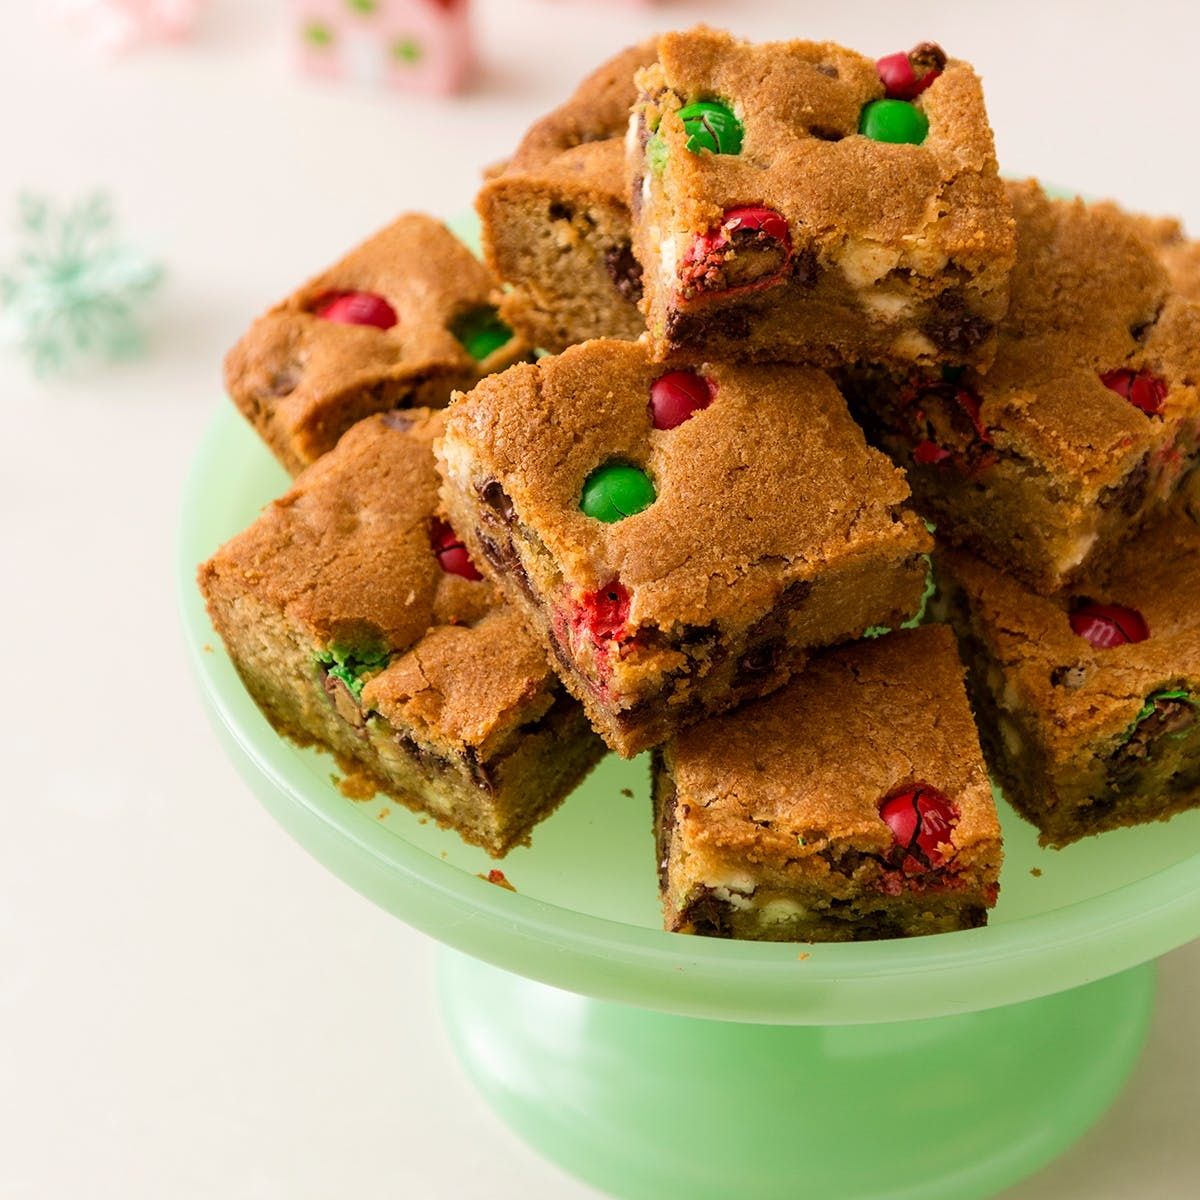 This M&M's Christmas Cookie Bar Recipe Stands No Chance of Survival at Holiday Parties